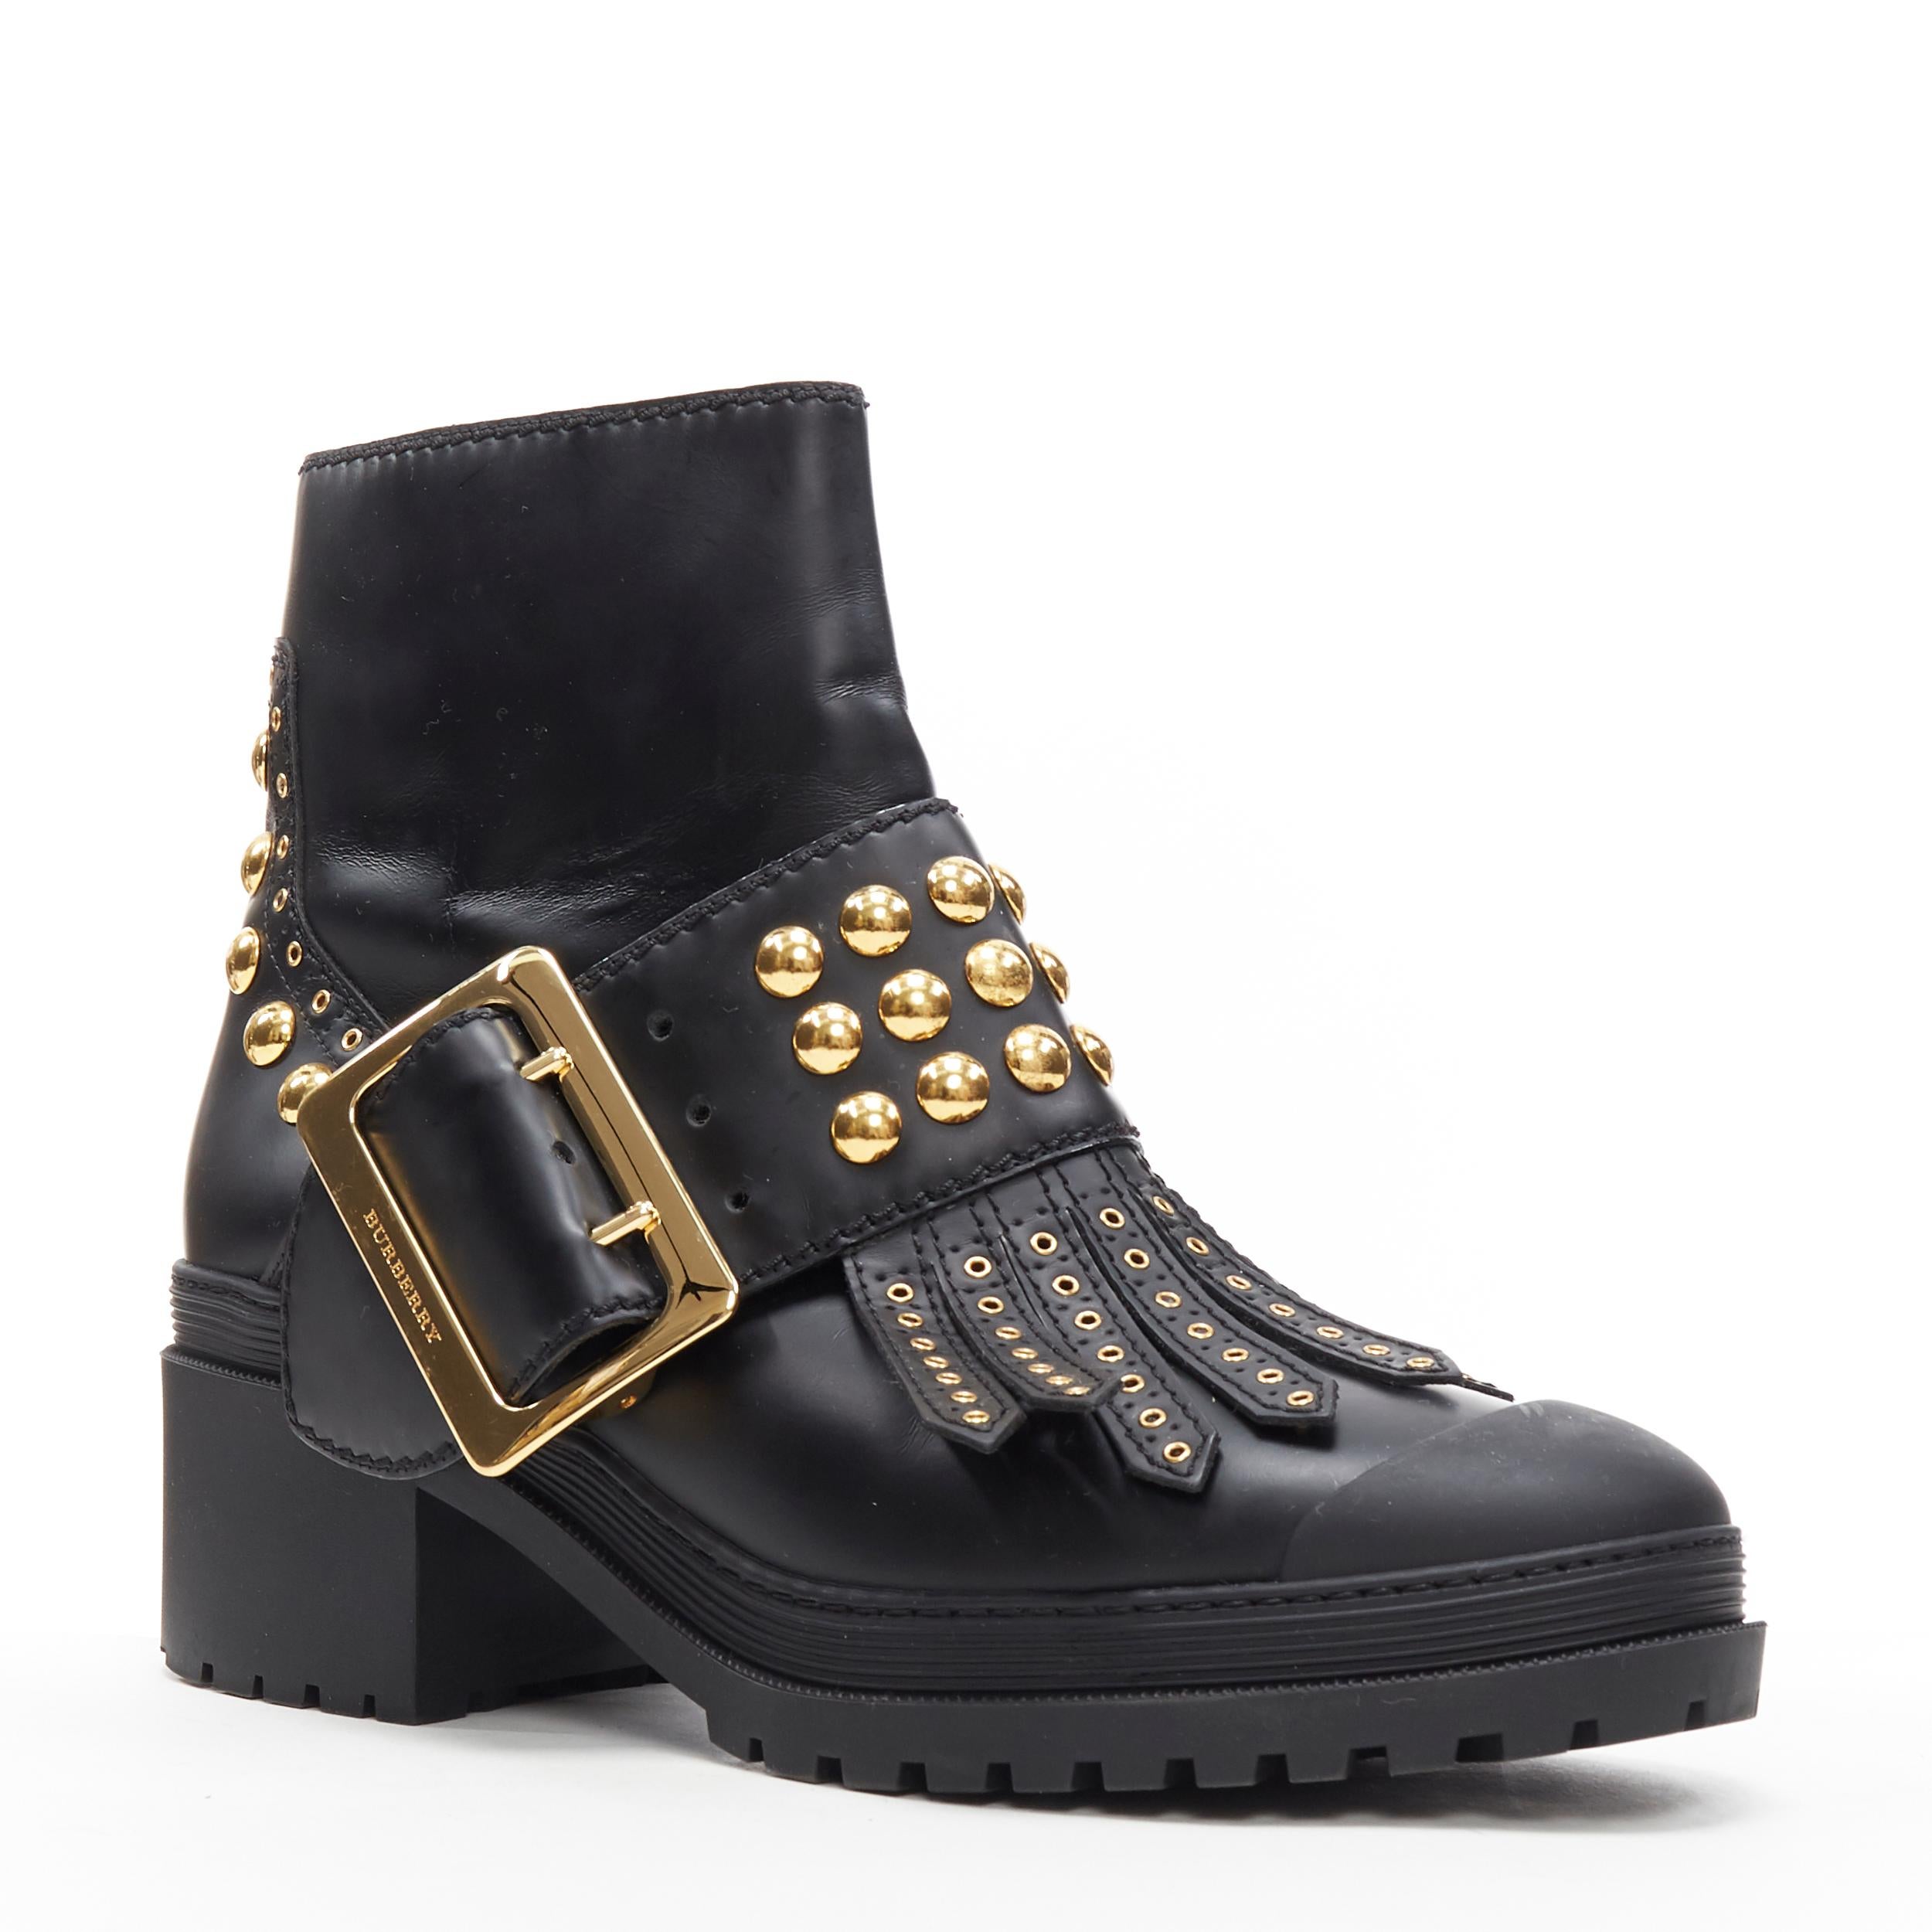 BURBERRY black leather gold studded fringe large buckle trucker ankle boot EU40
Brand: Burberry
Model Name / Style: Ankle boot
Material: Leather
Color: Black
Pattern: Solid
Closure: Zip
Extra Detail: Mid (2-2.9 in) heel height. Round Toe. Block